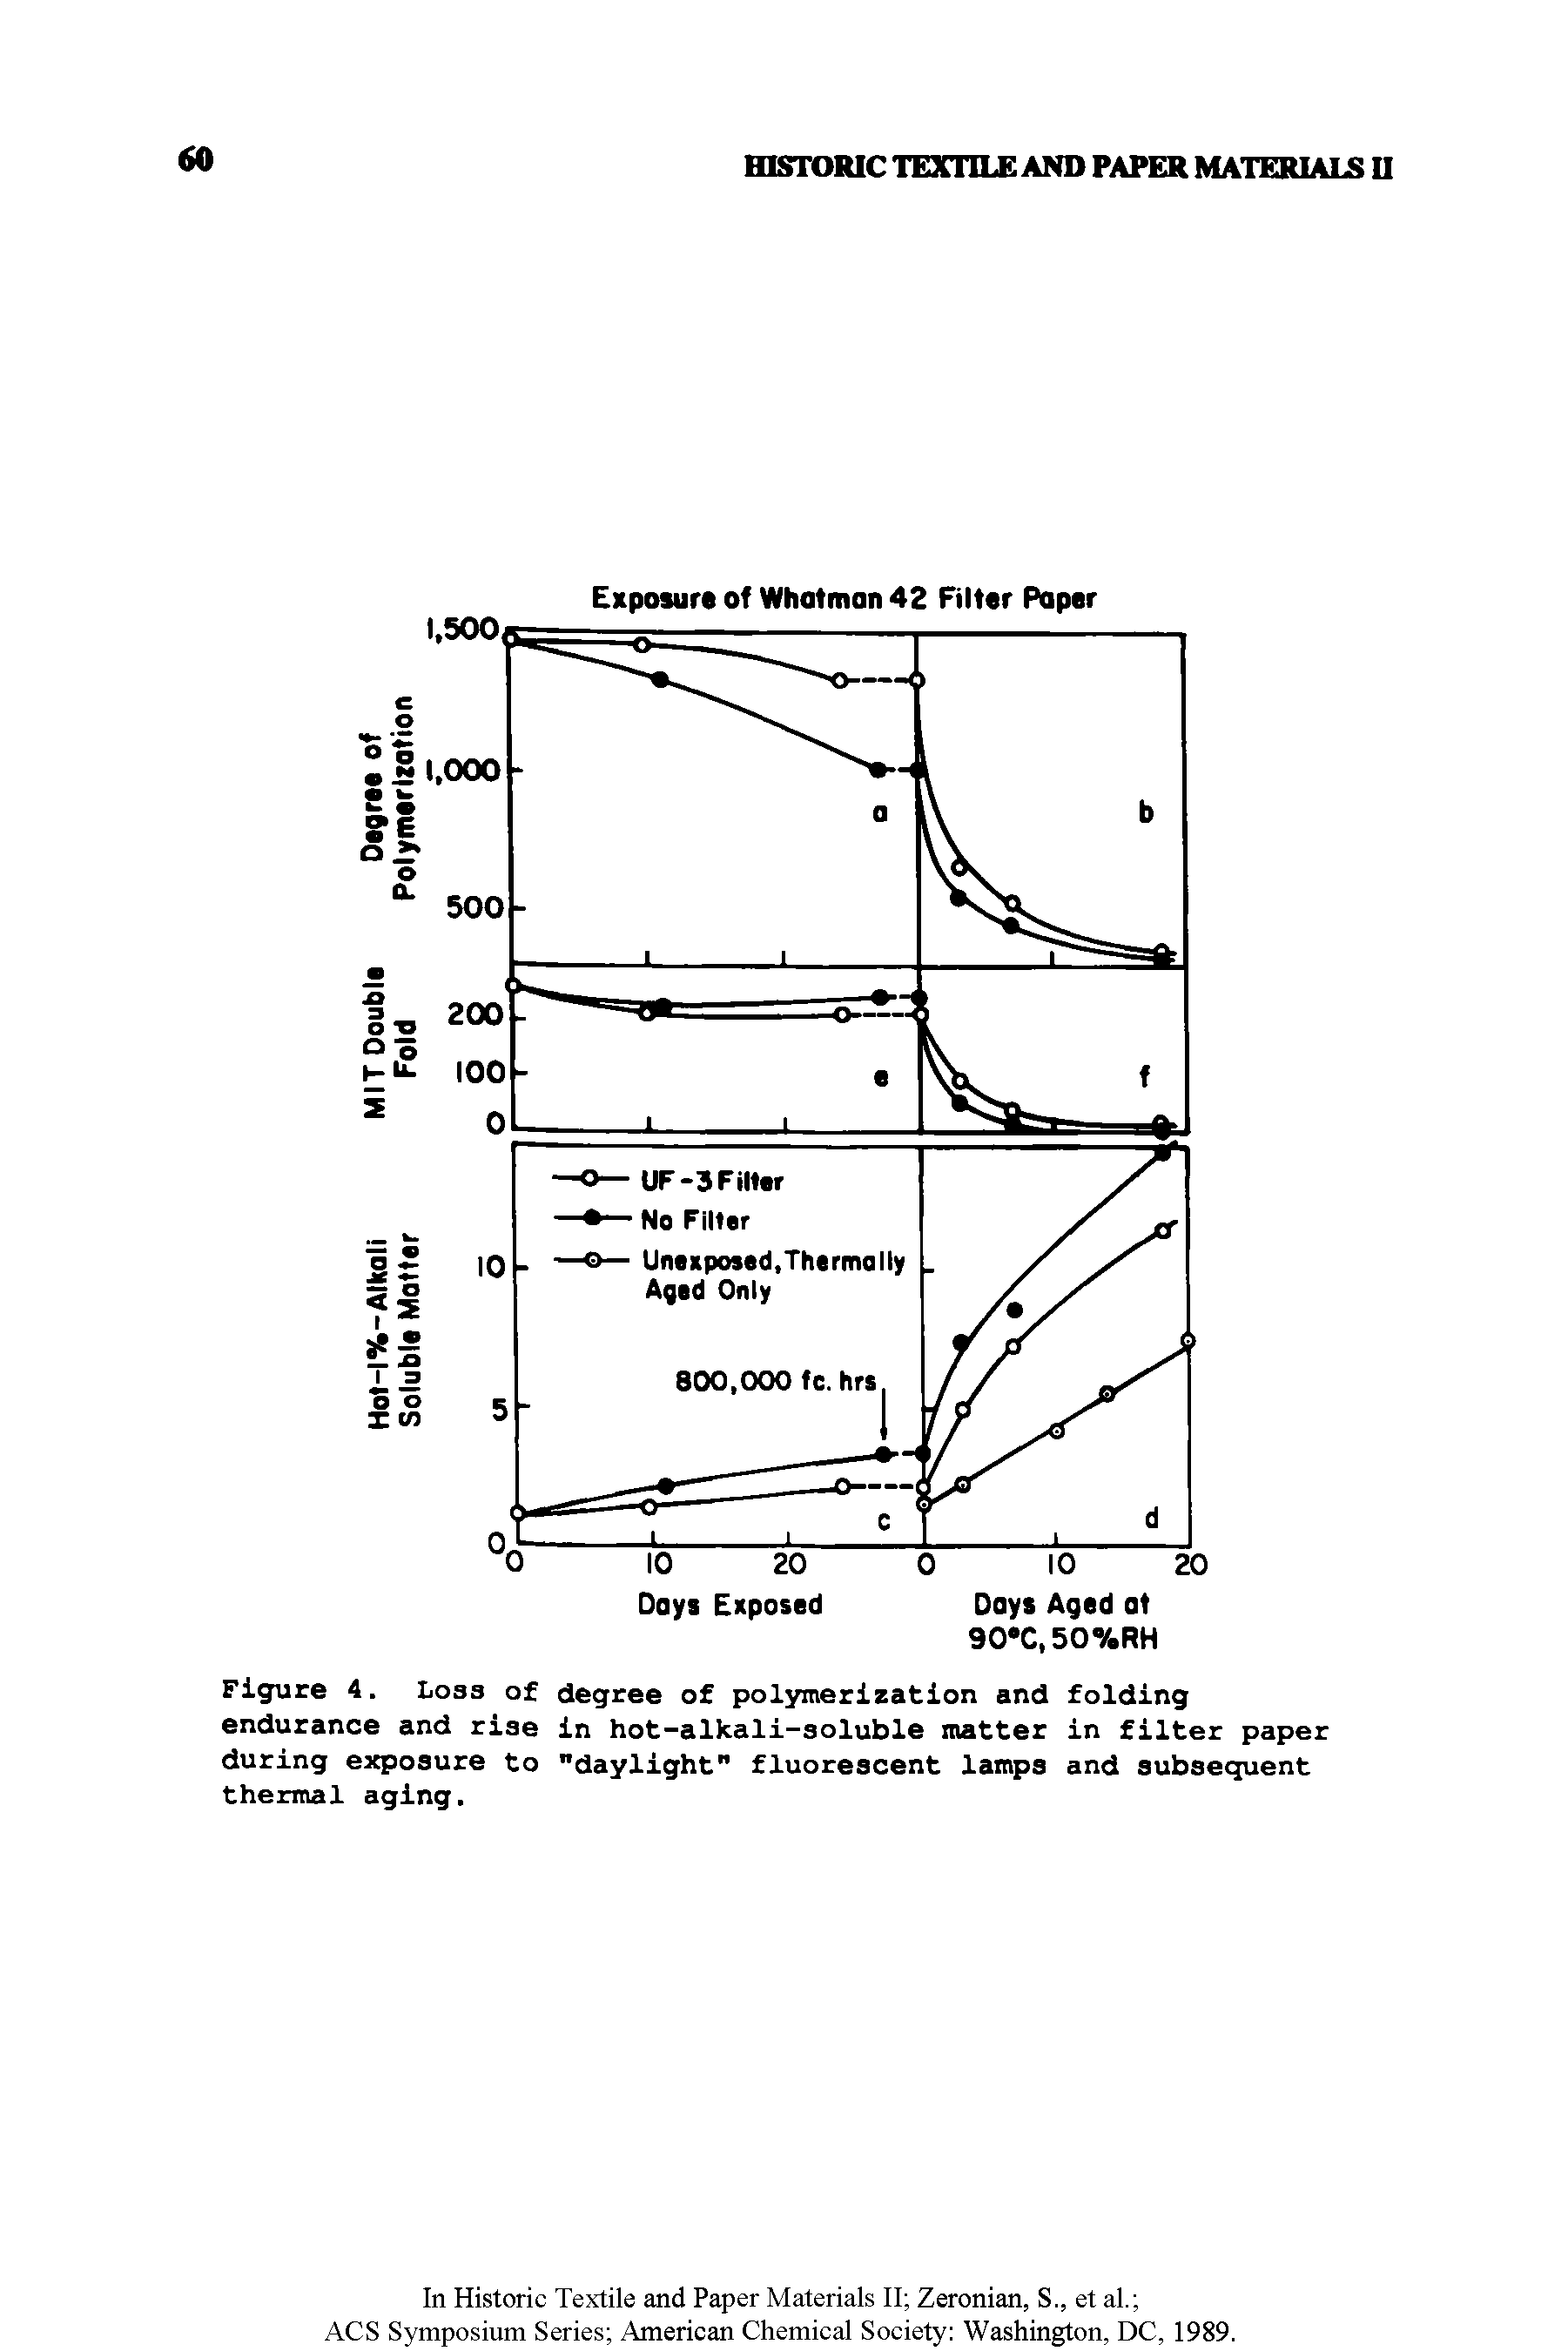 Figure 4. Loss of degree of polymerization and folding endurance and rise in hot-alkali-soluble matter in filter paper during exposure to "daylight" fluorescent lamps and subsequent thermal aging.